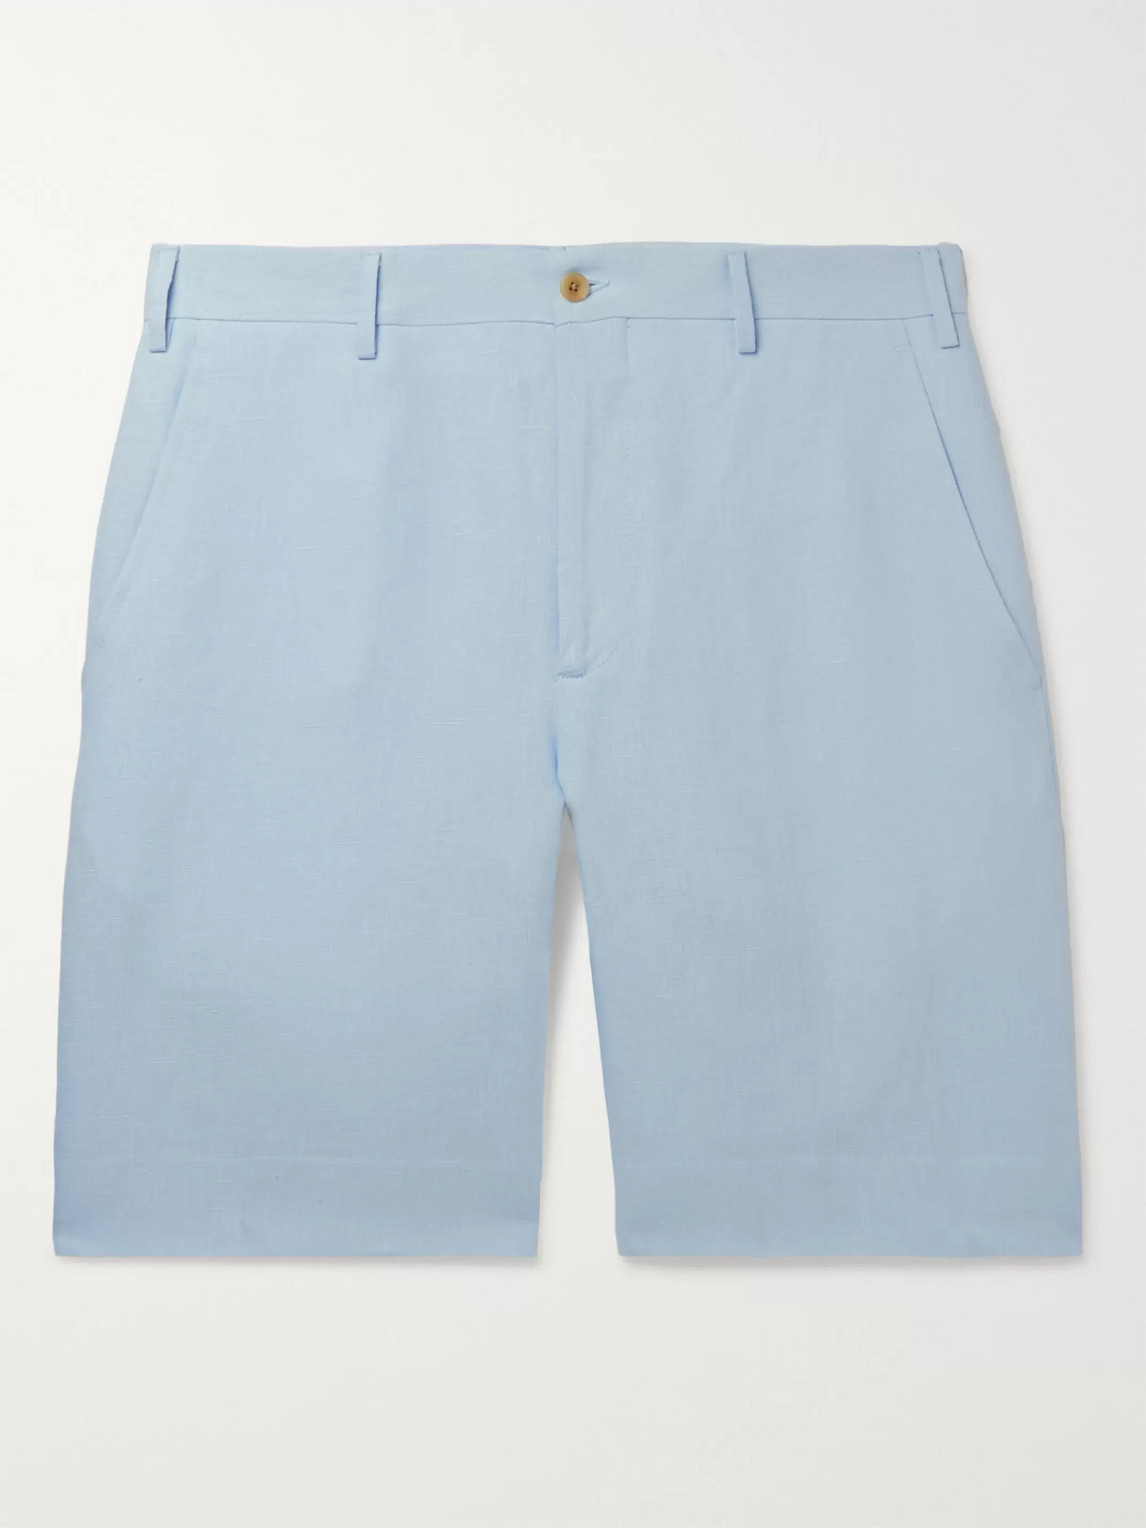 Anderson & Sheppard Linen Shorts In Blue